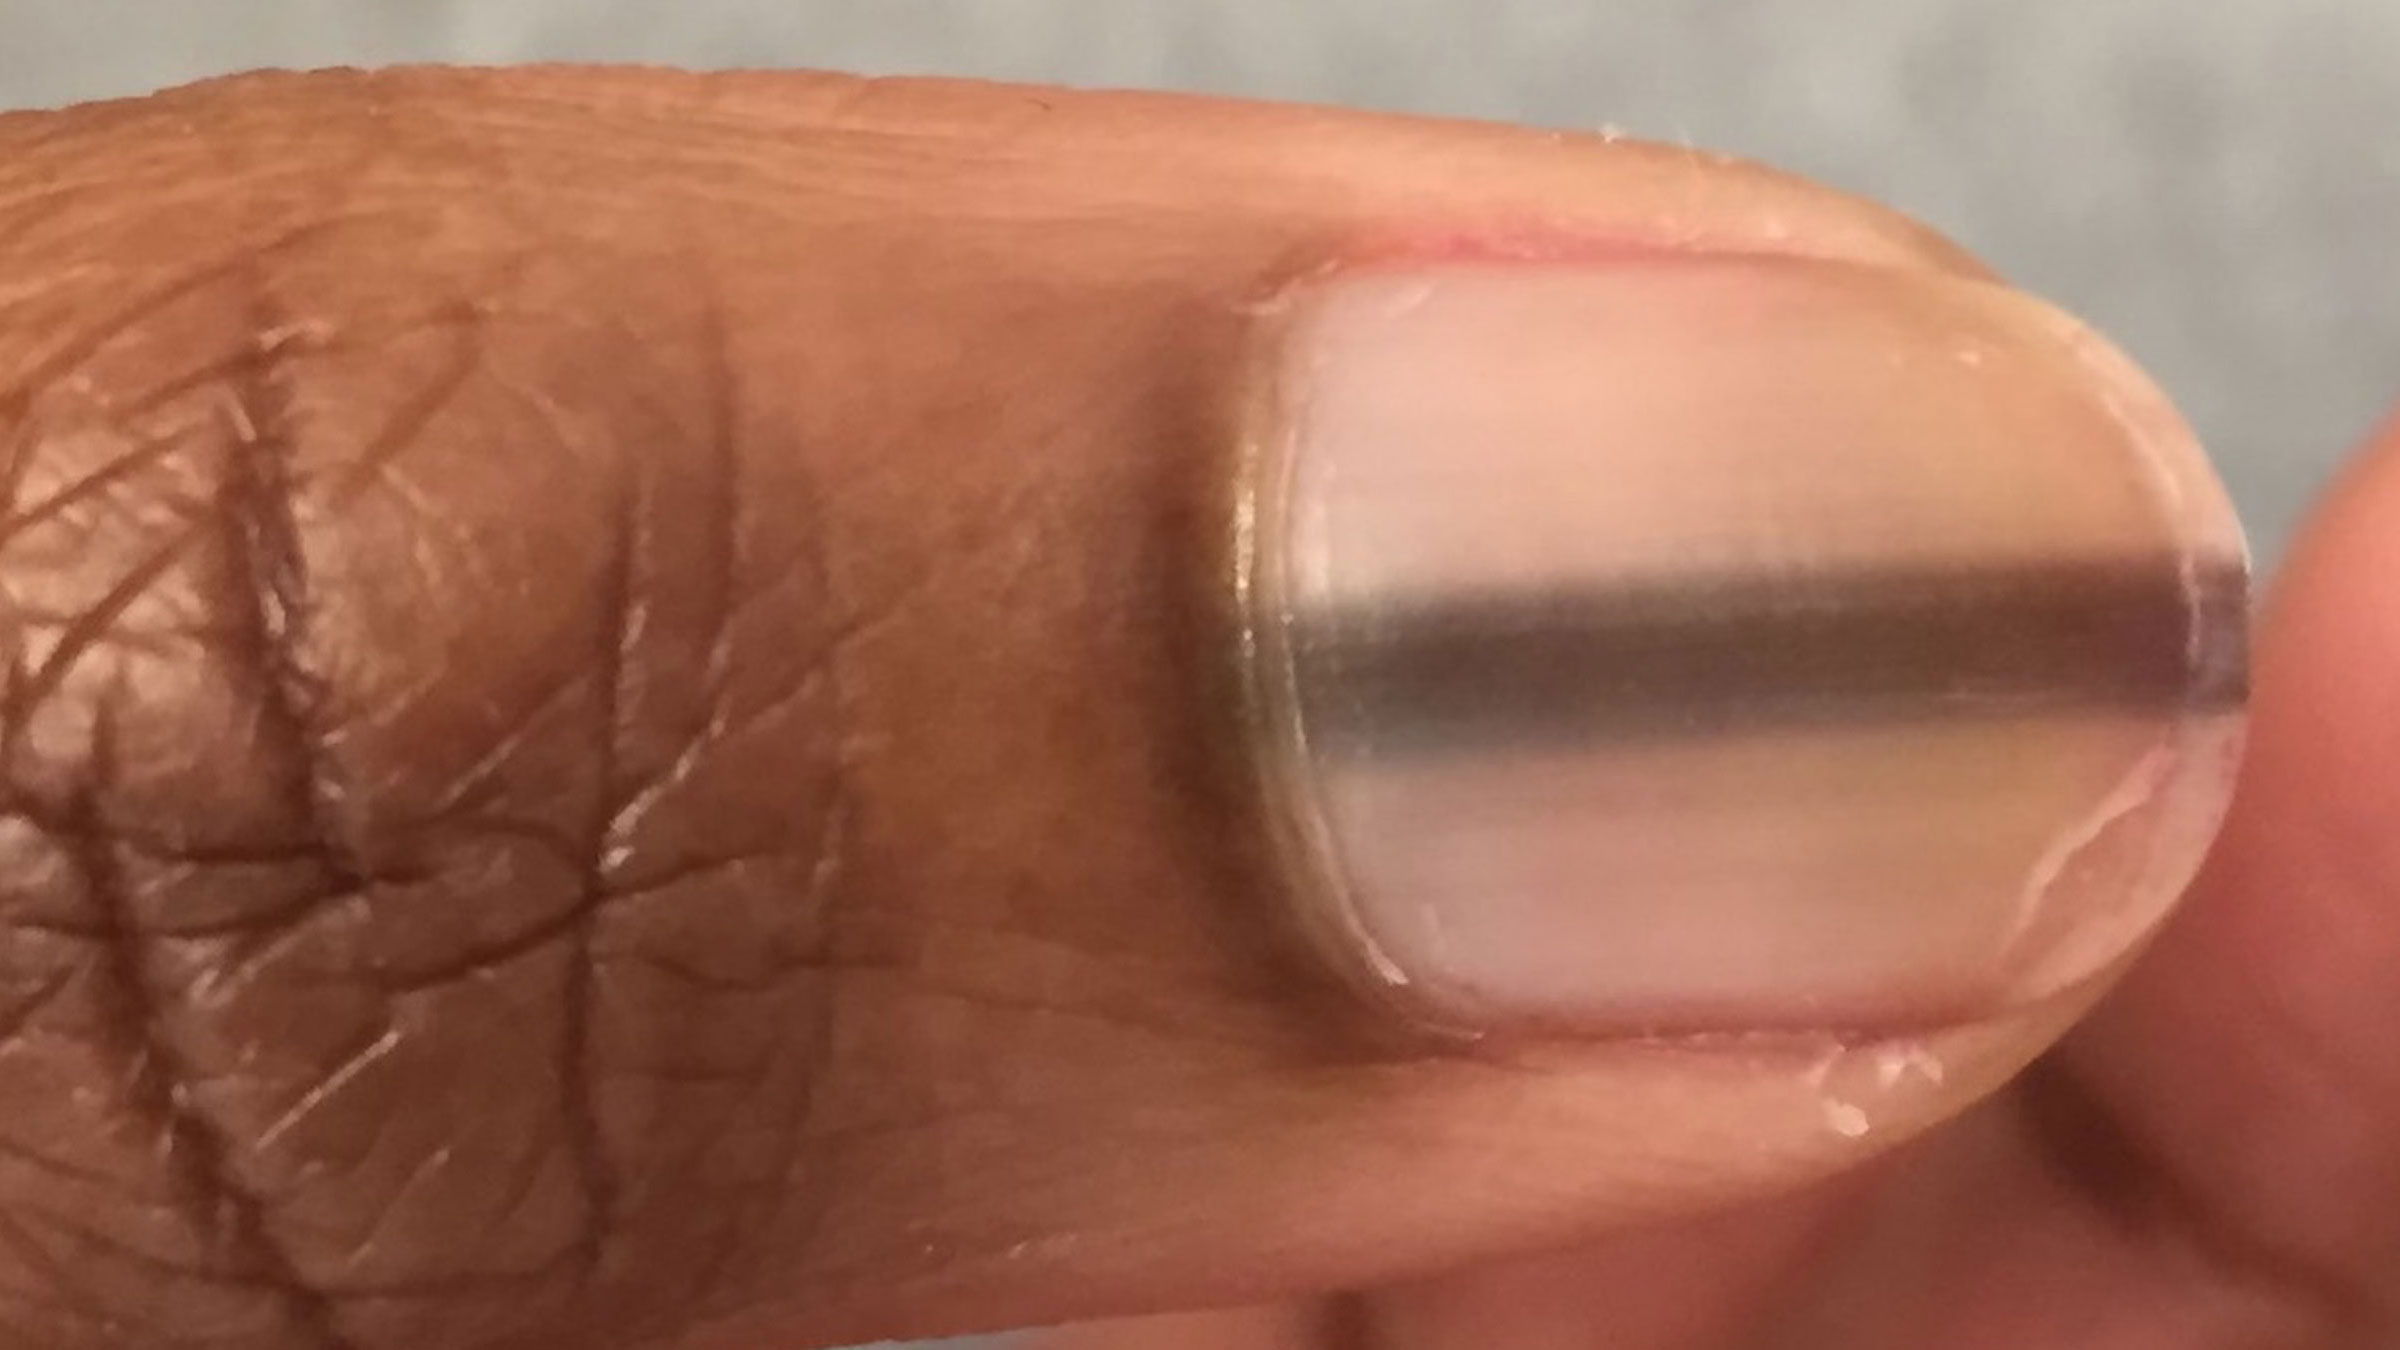 Nailed it: How fingertip searches can shine a light on cancer |  AuntMinnieEurope